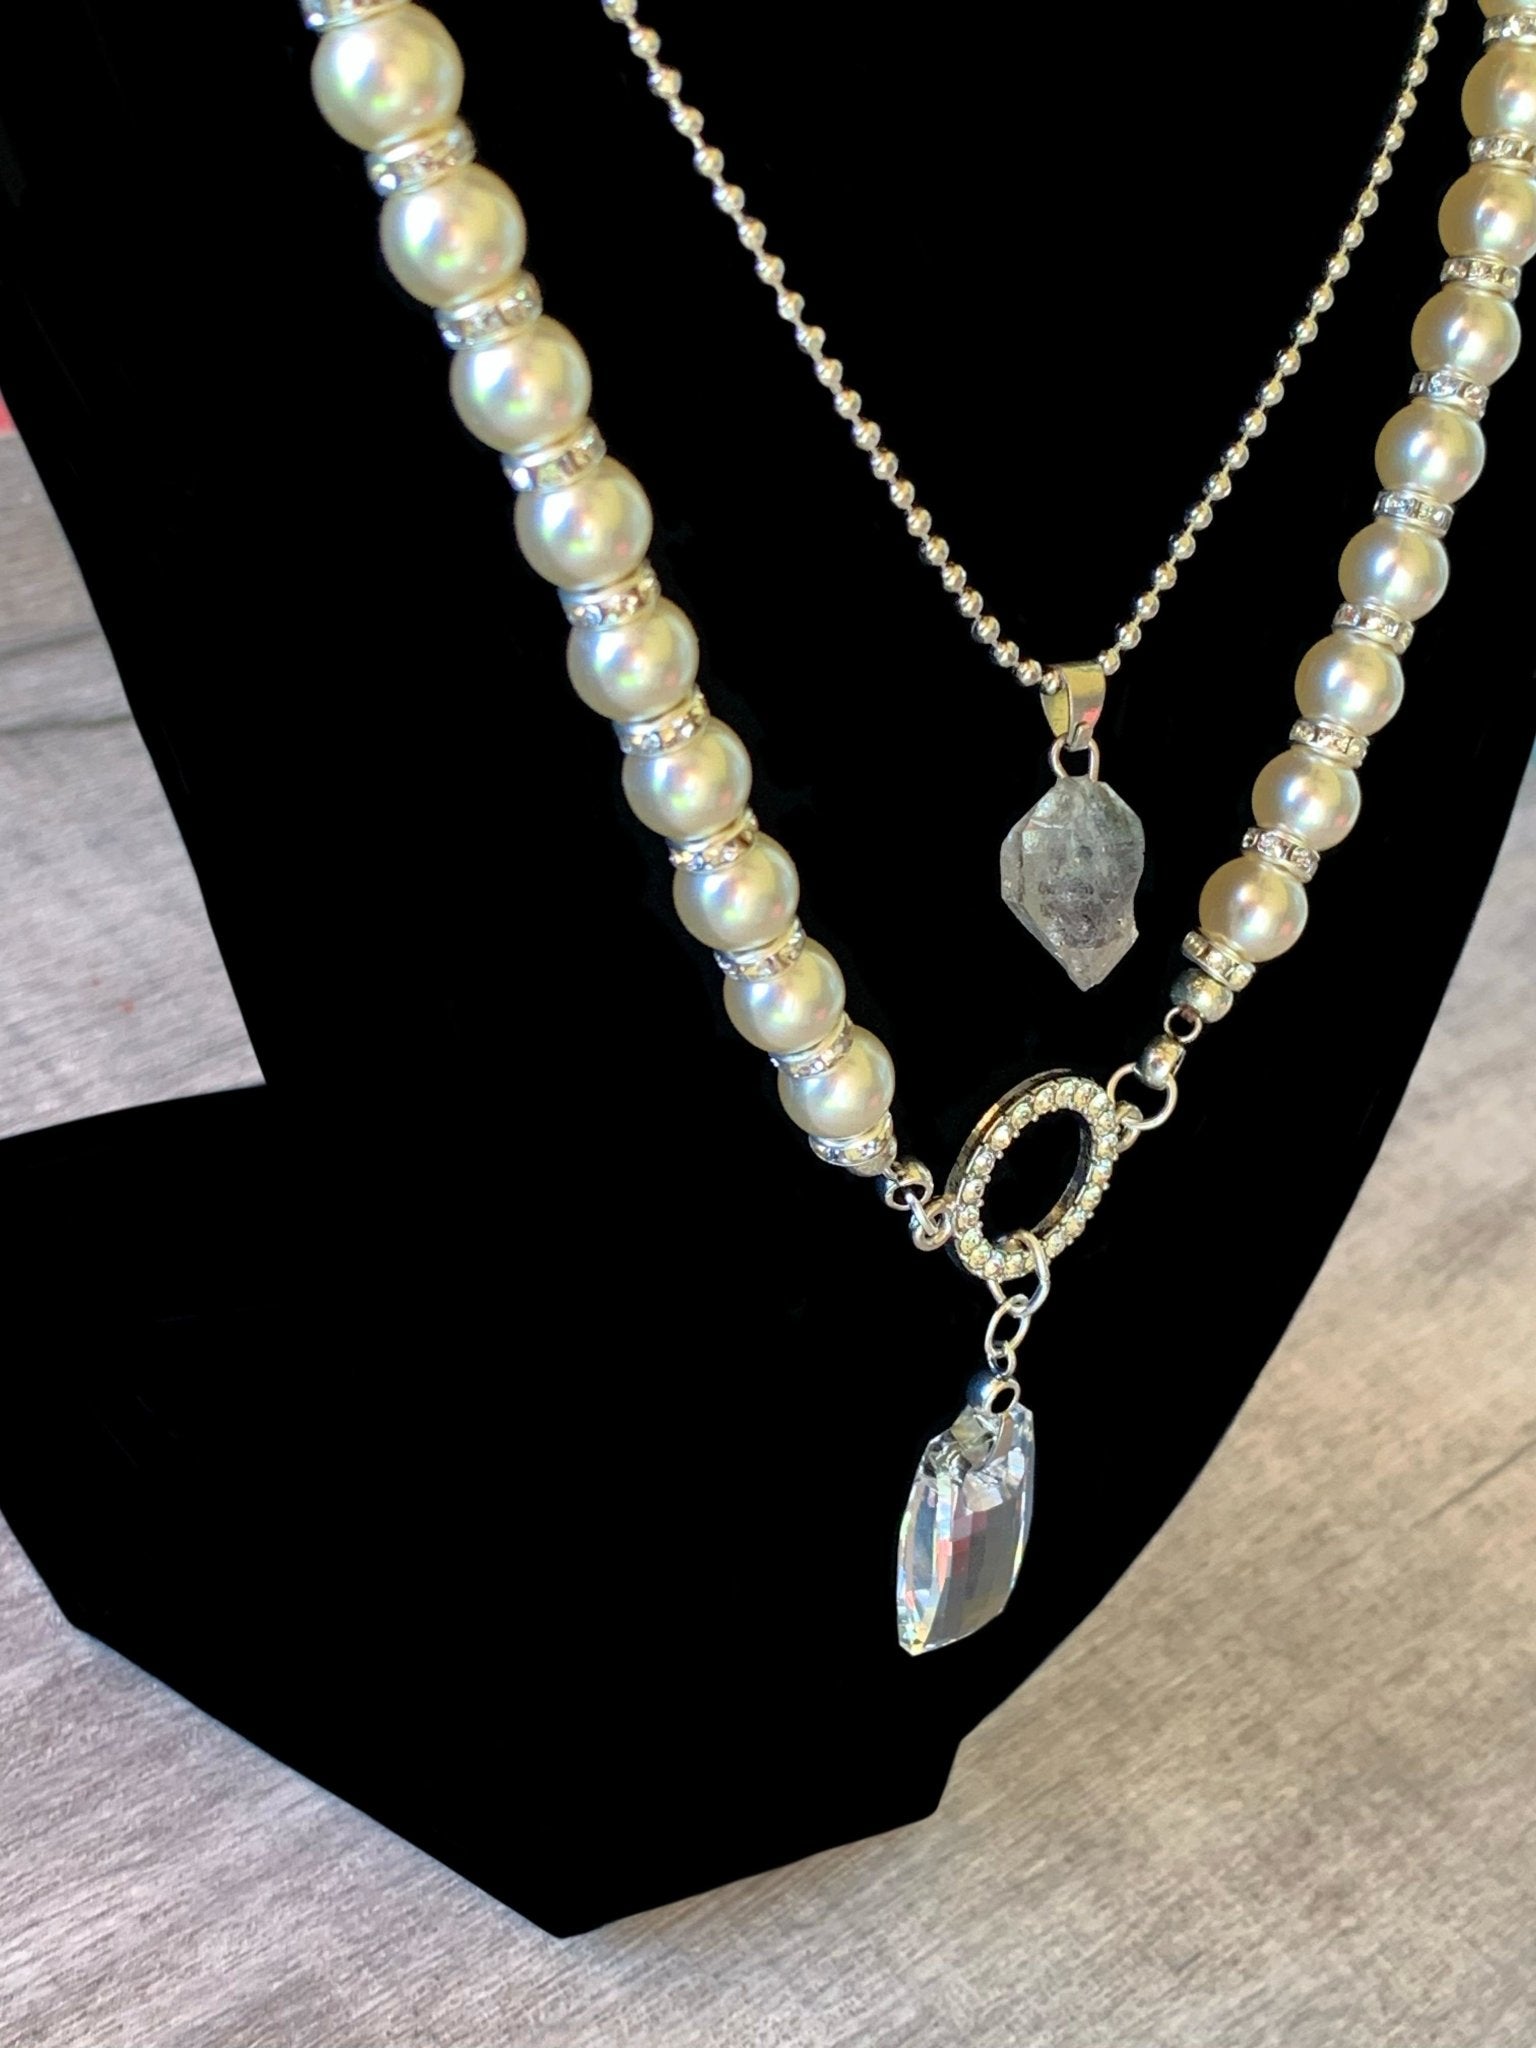 🔴SOLD🔴 Laura Handmade Faux Pearl 31" Necklace with Swarovski Elements Crystal Pendant - Born Mystics